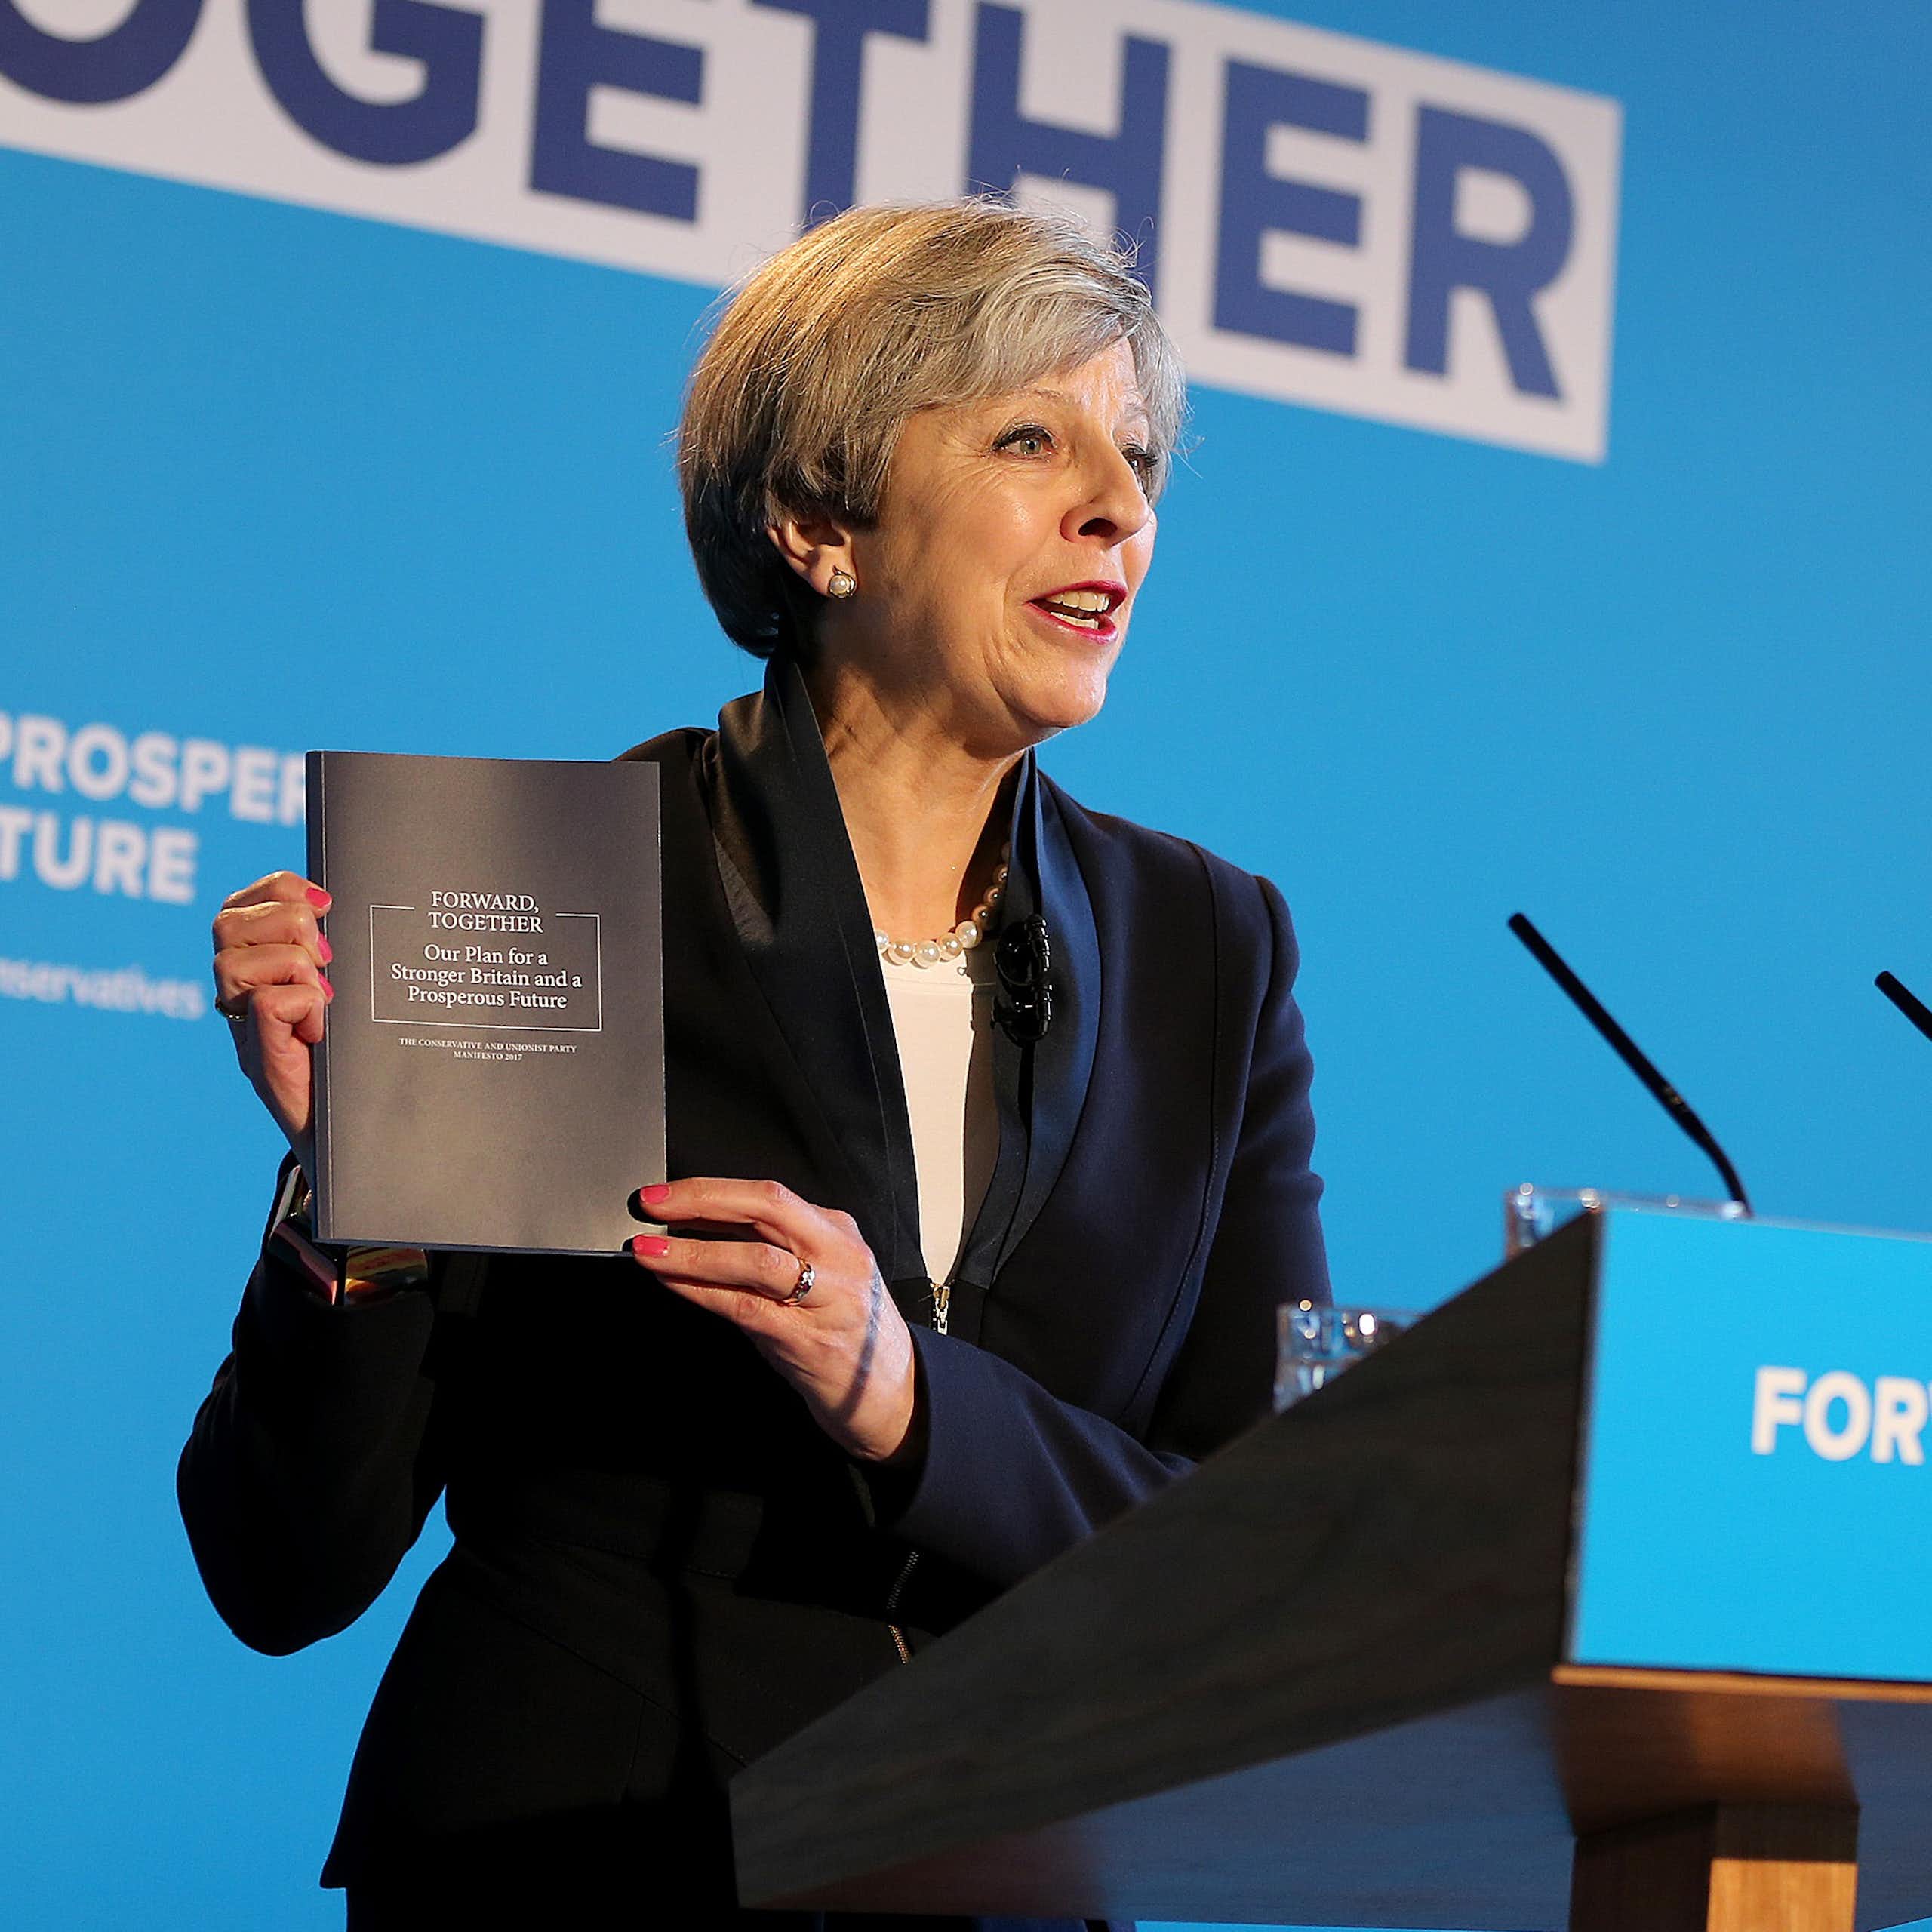 Theresa May, standing at a blue podium reading 'forward together', holds up a copy of the 2017 Conservative manifesto